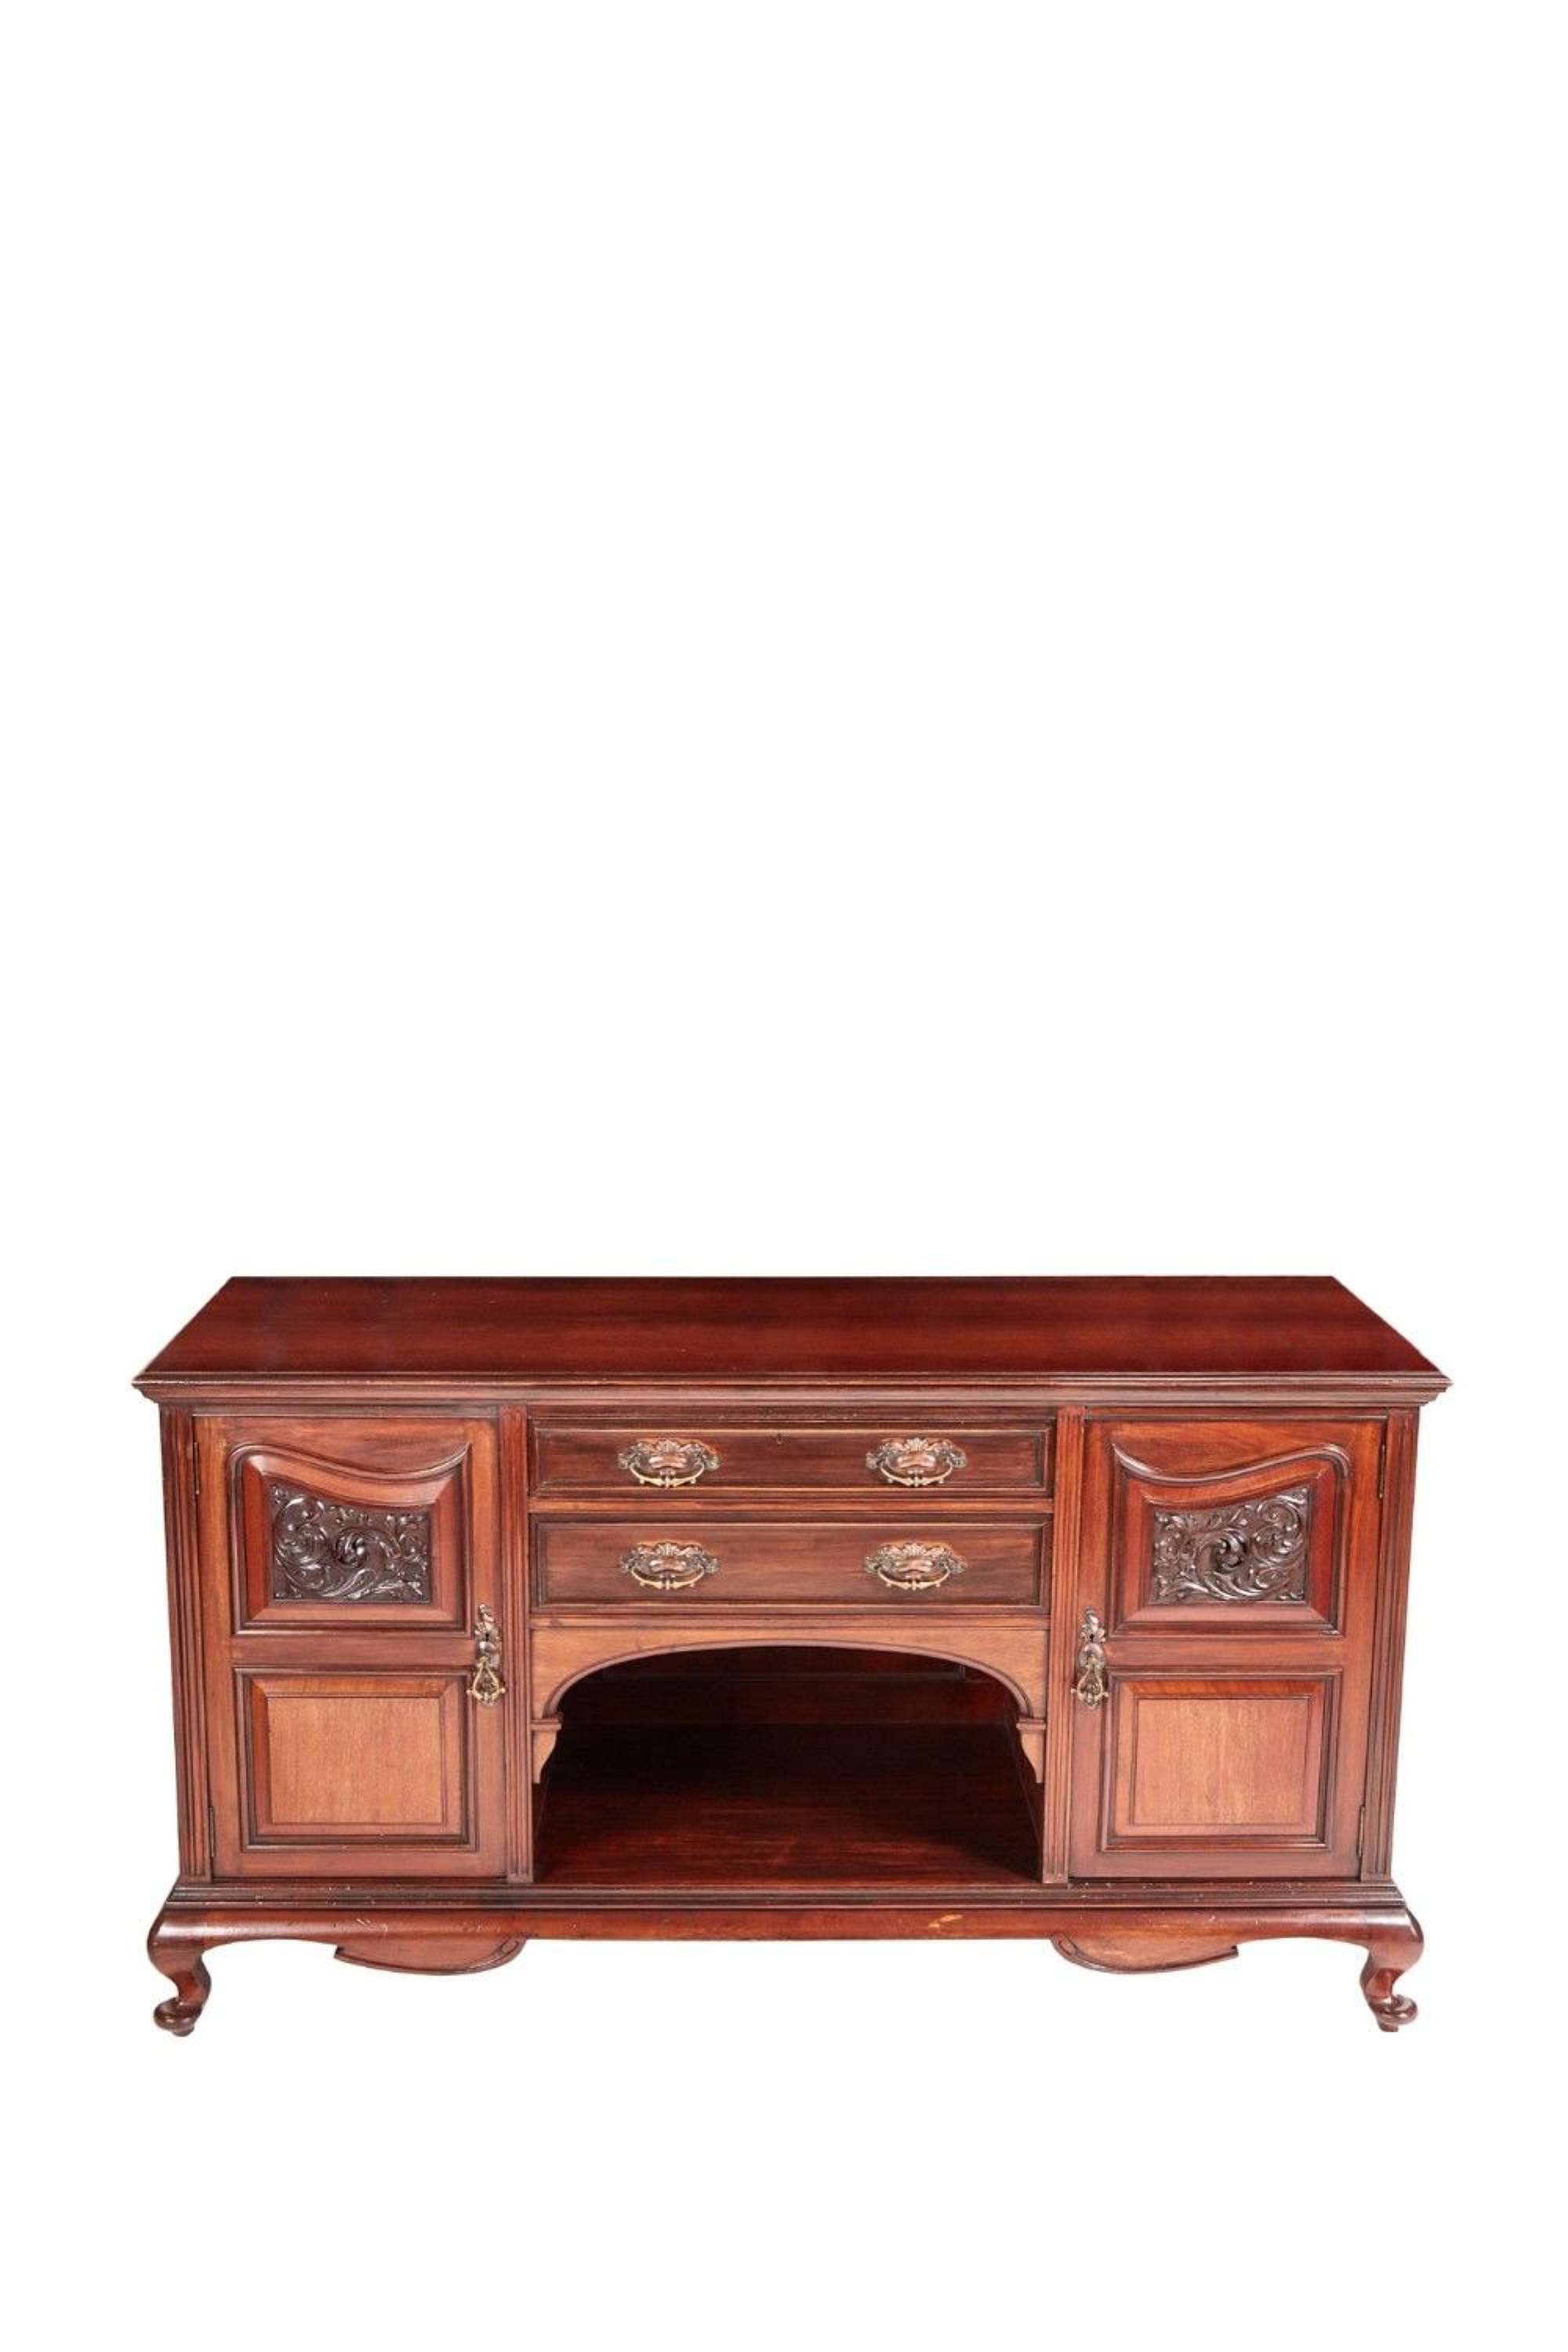 Quality Antique Carved Mahogany Sideboard By Maple & Co